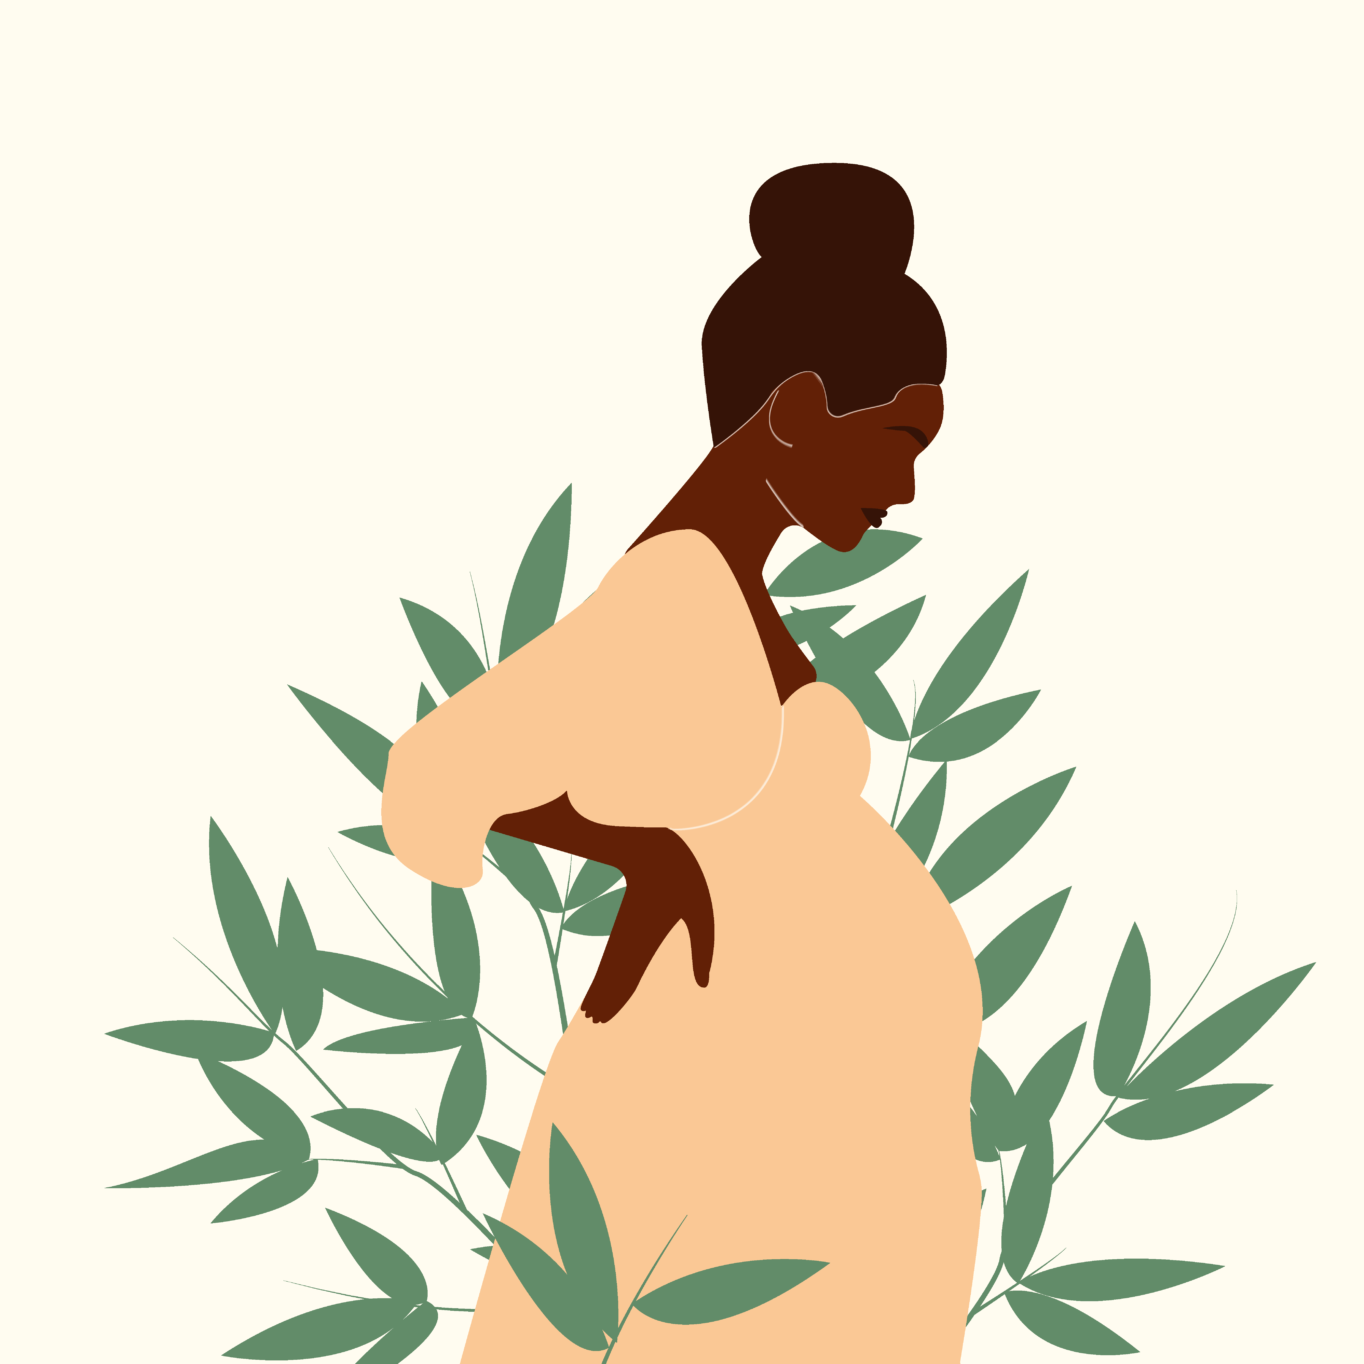 A graphic of a pregnant woman with a white dress and green leaves